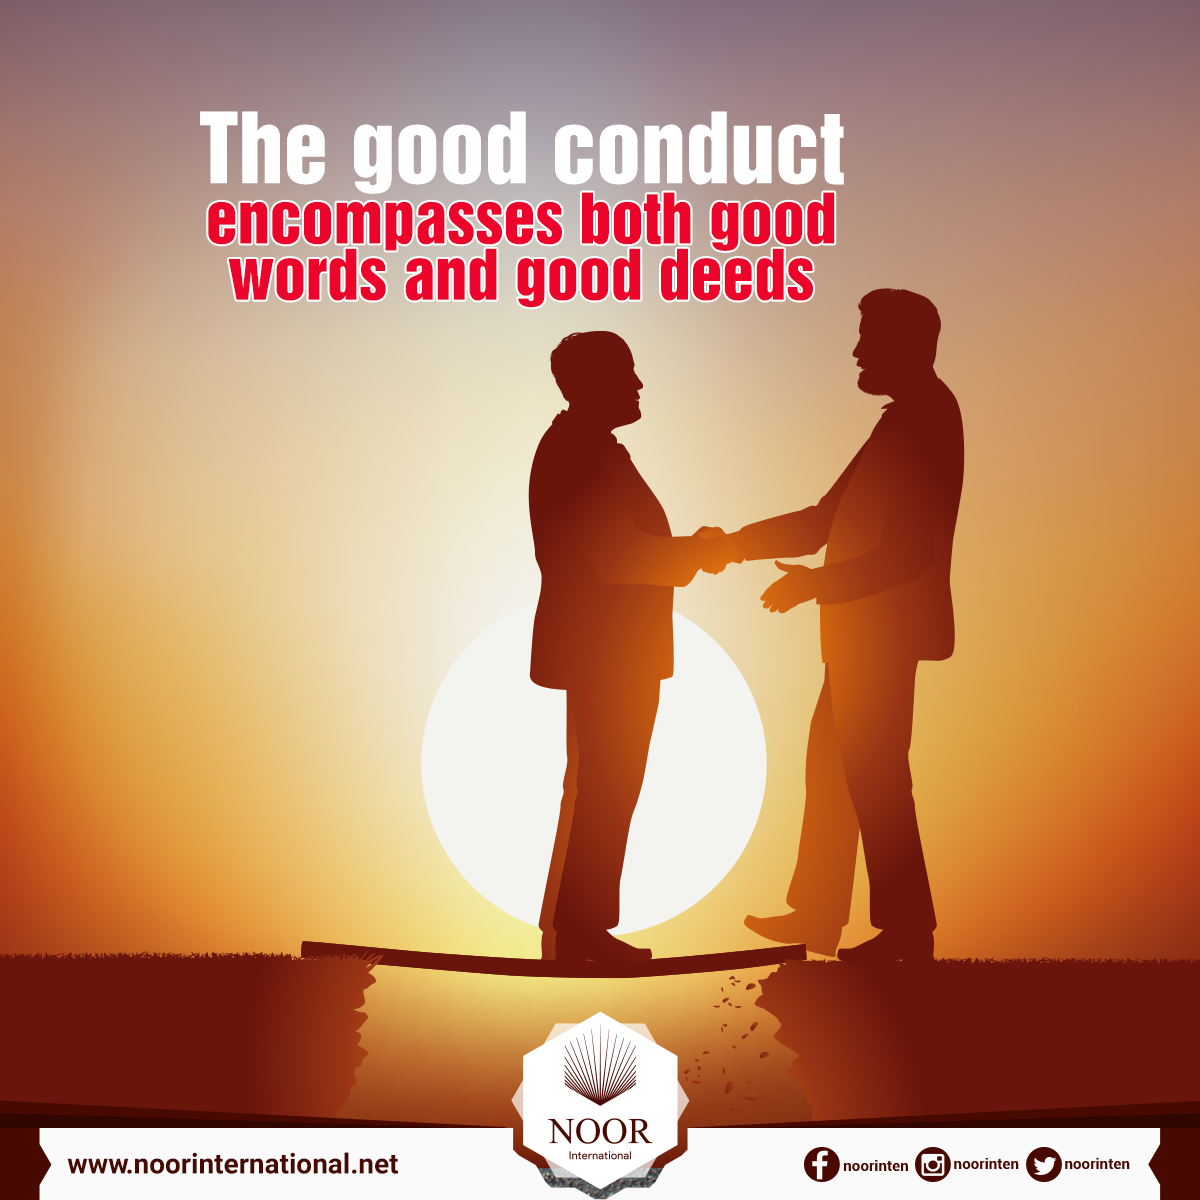 The good conduct encompasses both good words and good deeds